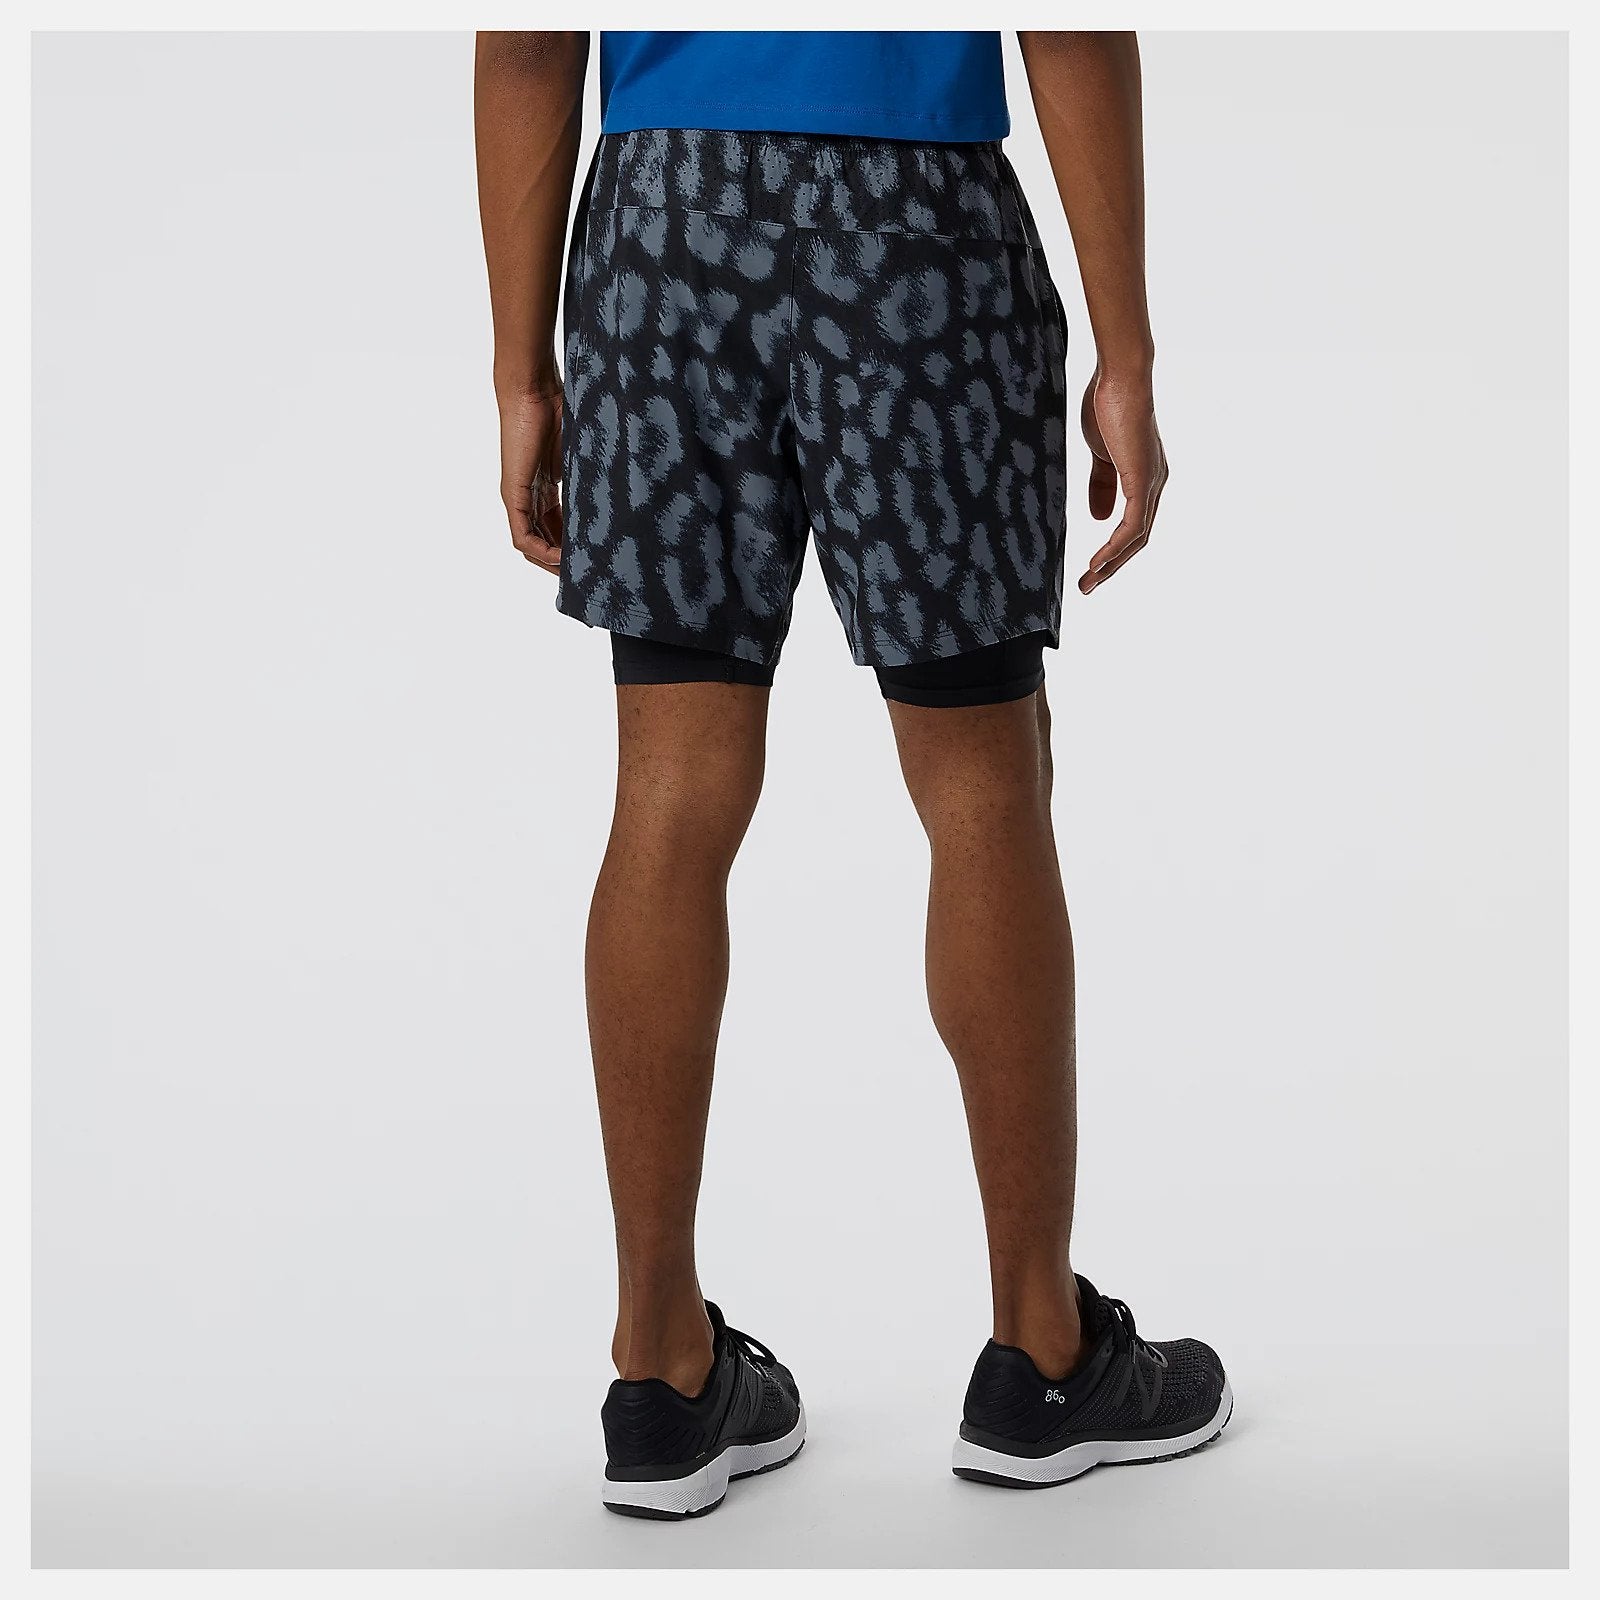 Back view of the R.W. Tech Printed Men's 2-in-1 Short in Black